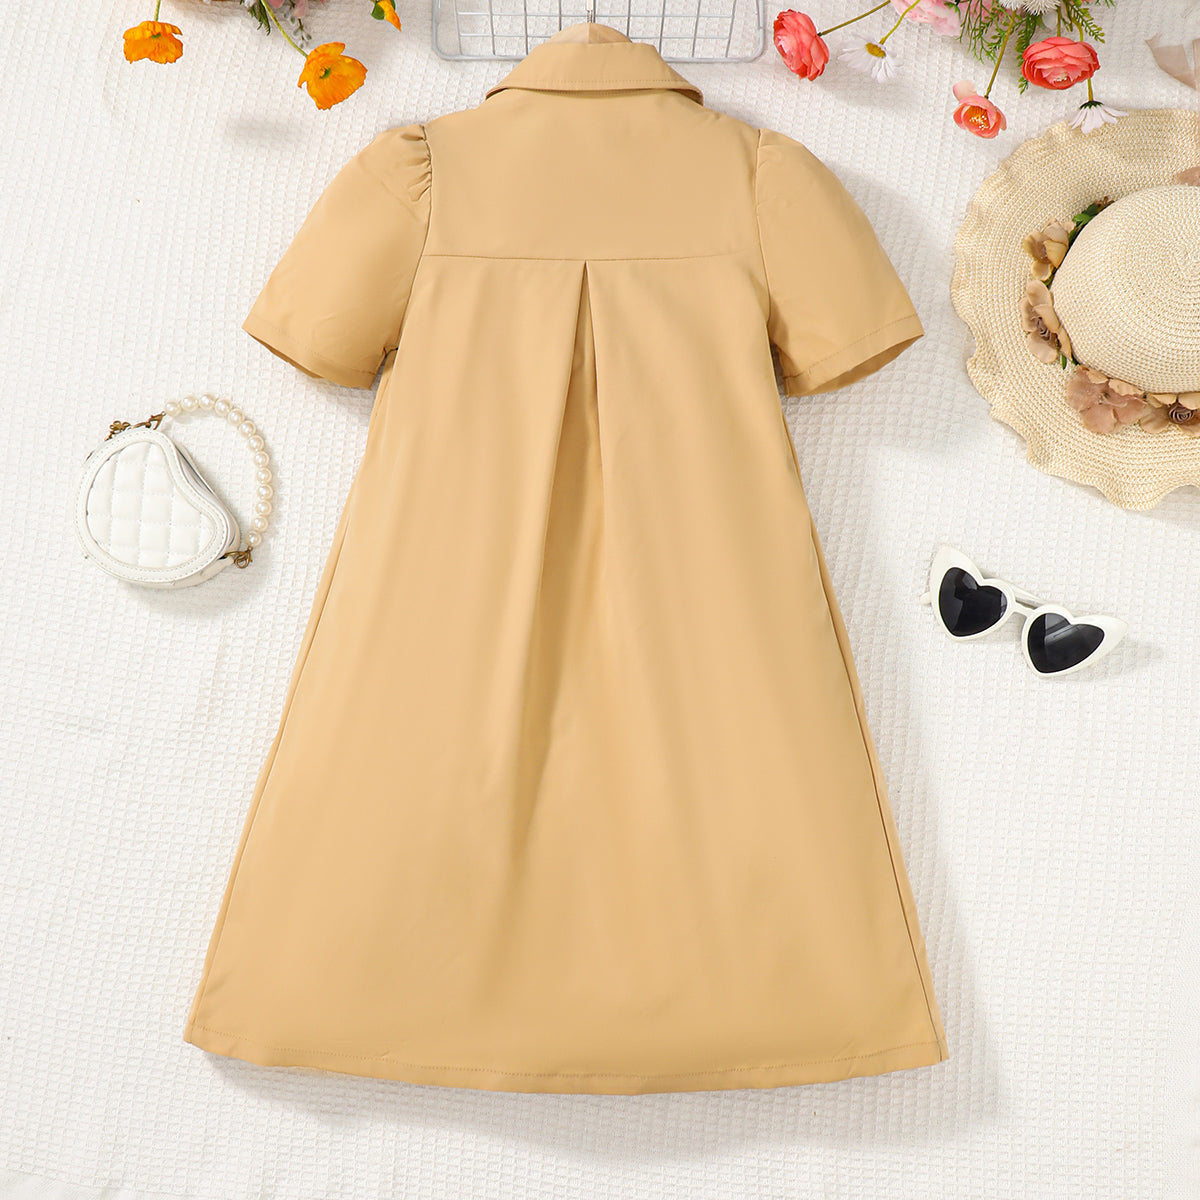 Uylee's Boutique Short Sleeve Collared Neck A-Line Dress